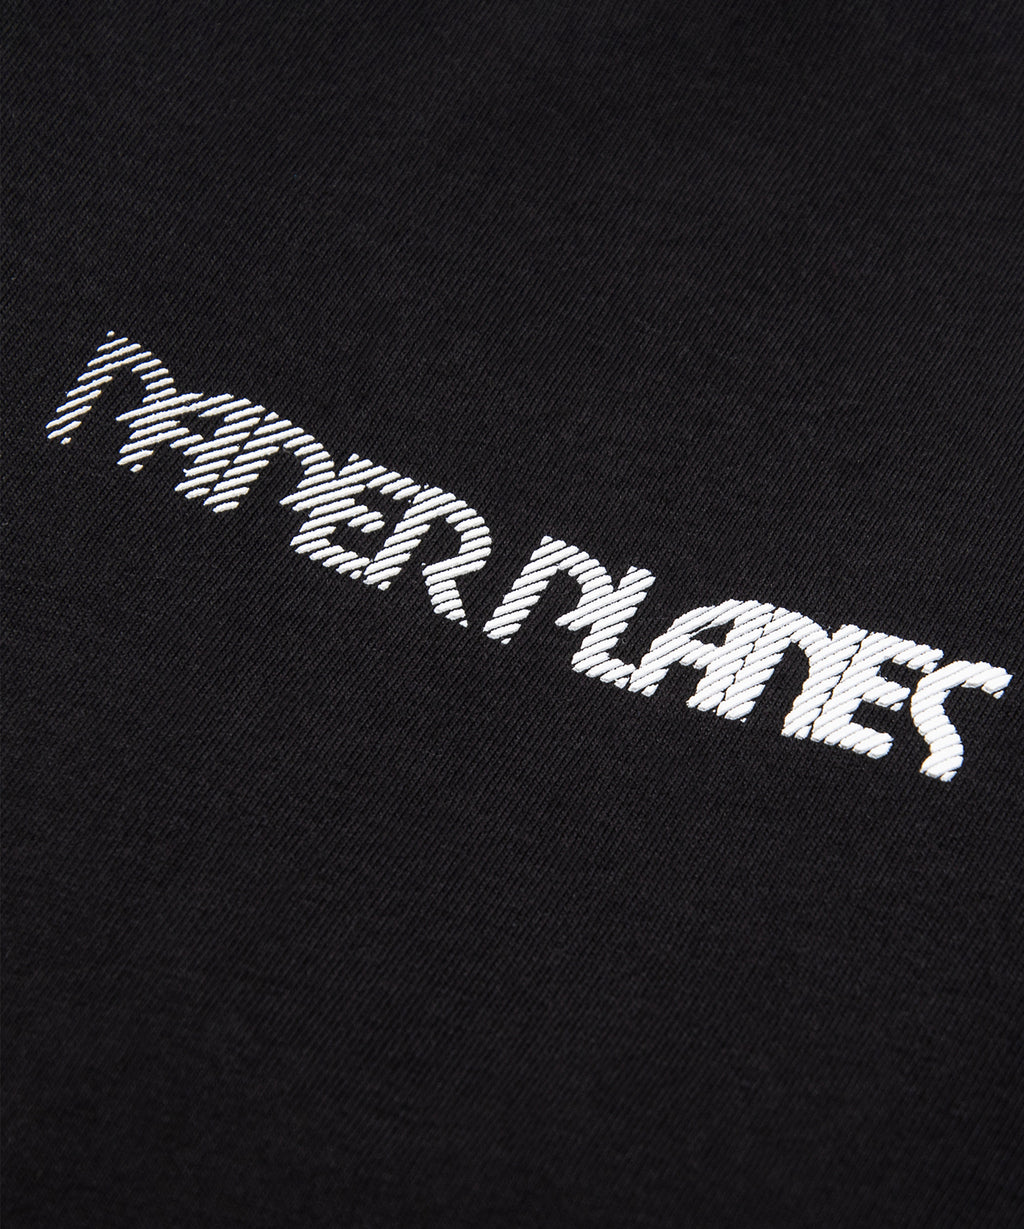  PAPER PLANES silicone HD print on chest - Paper Planes Tee, color Black.